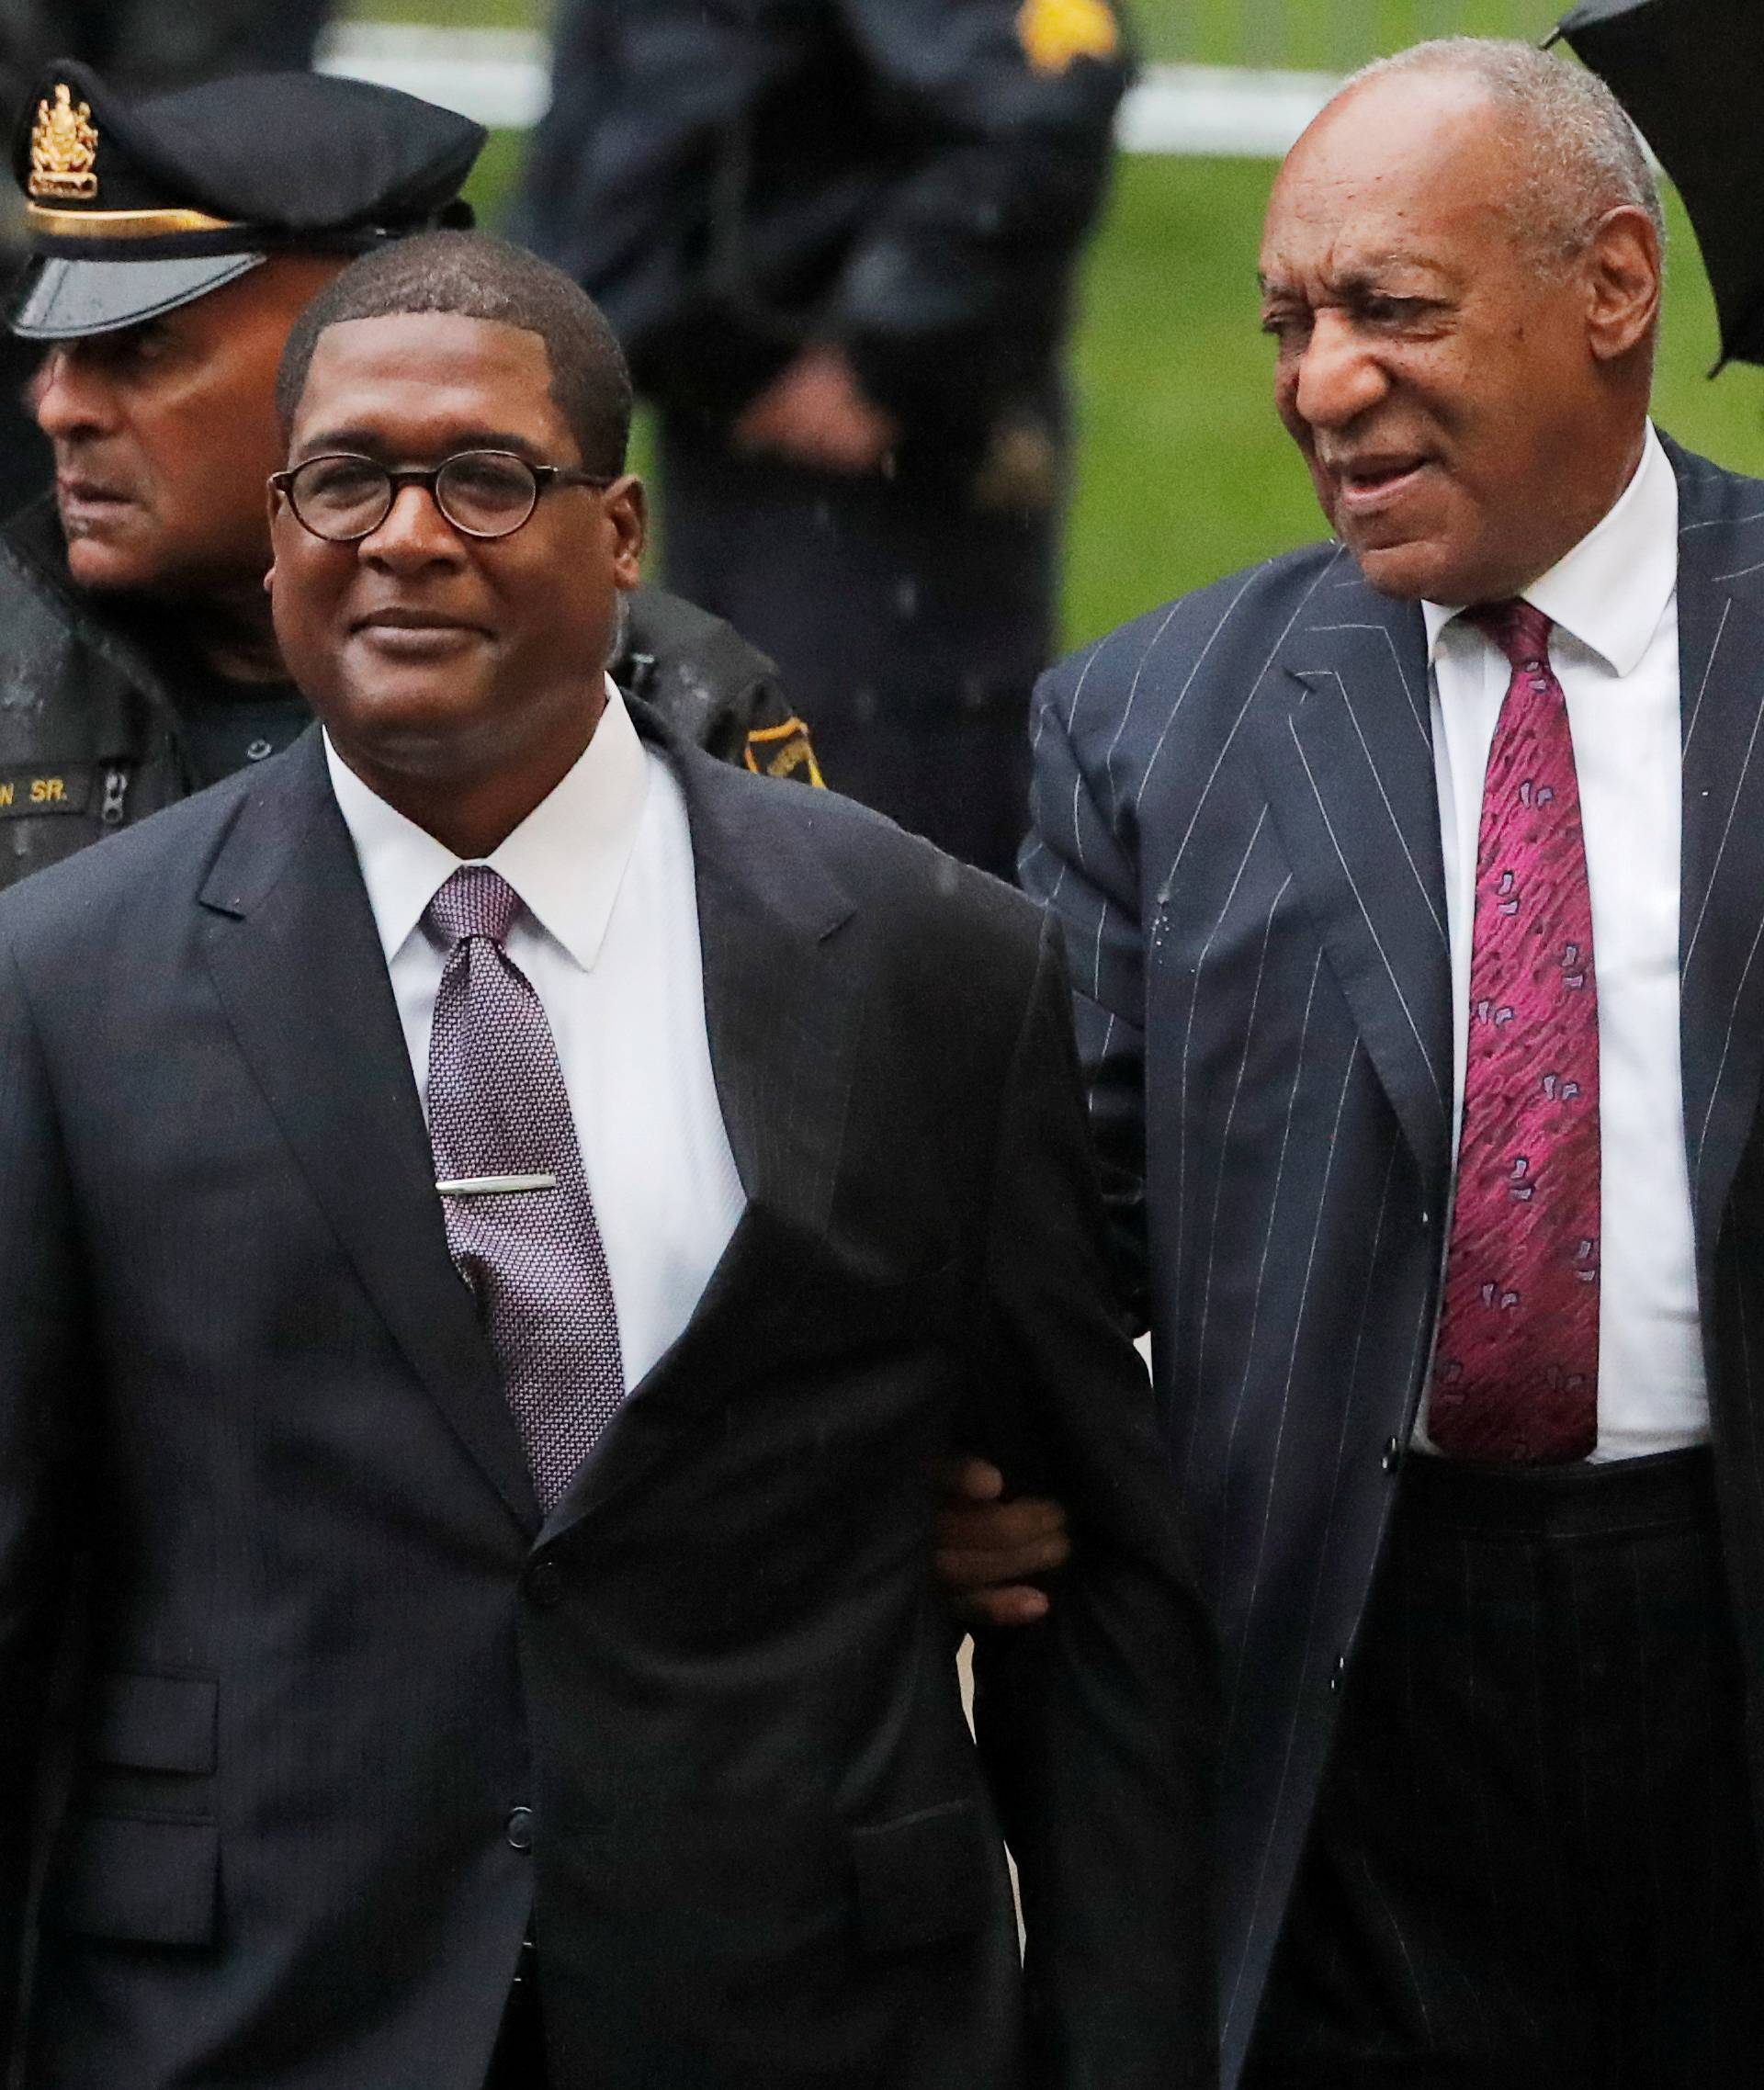 Actor and comedian Bill Cosby arrives at the Montgomery County Courthouse for sentencing in his sexual assault trial in Norristown